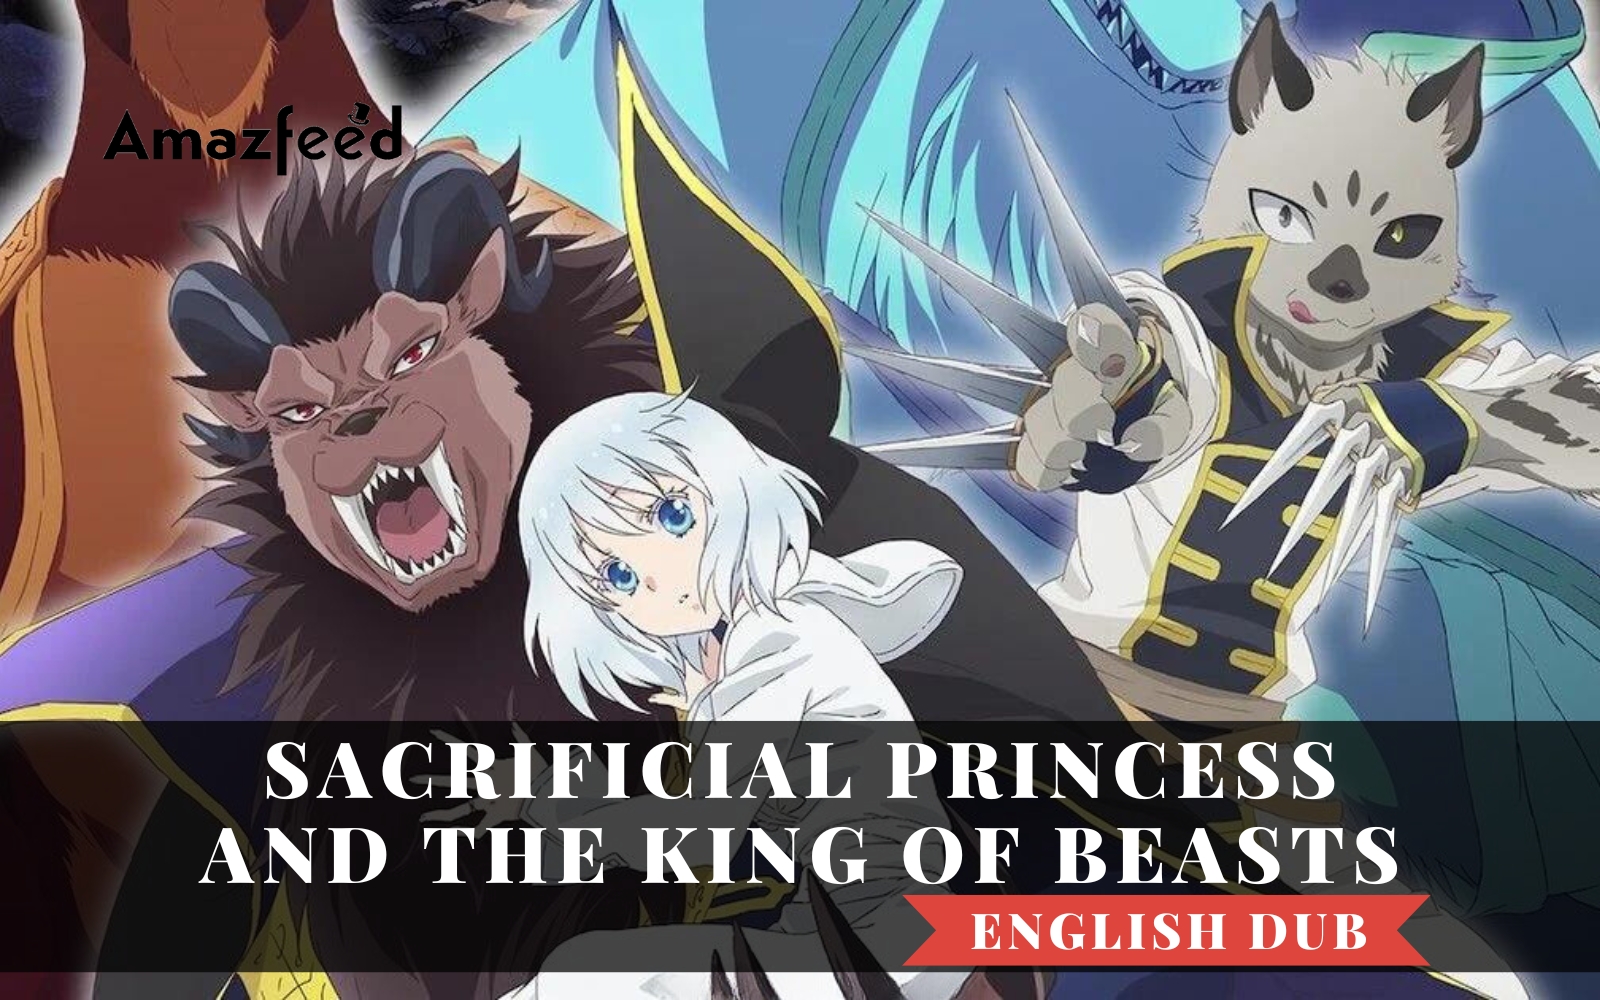 Category:Characters, Sacrificial Princess and the King of Beasts Wiki